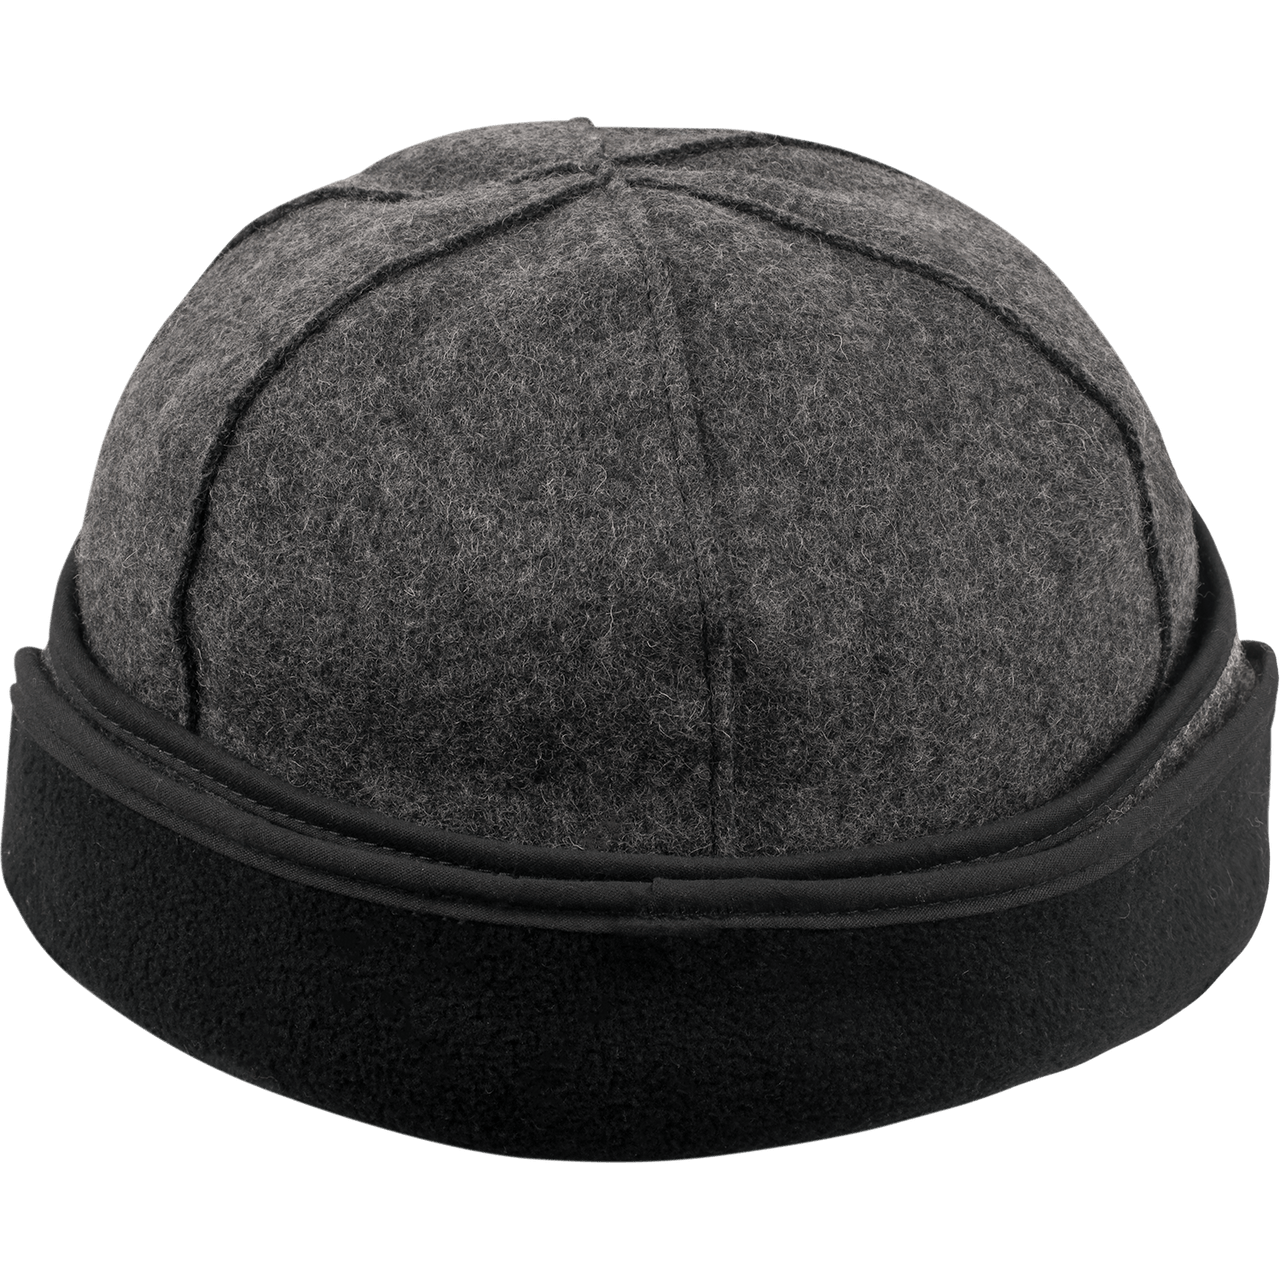 back view of Stormy Kromer Rancher gray wool rancher cap with ear flaps up